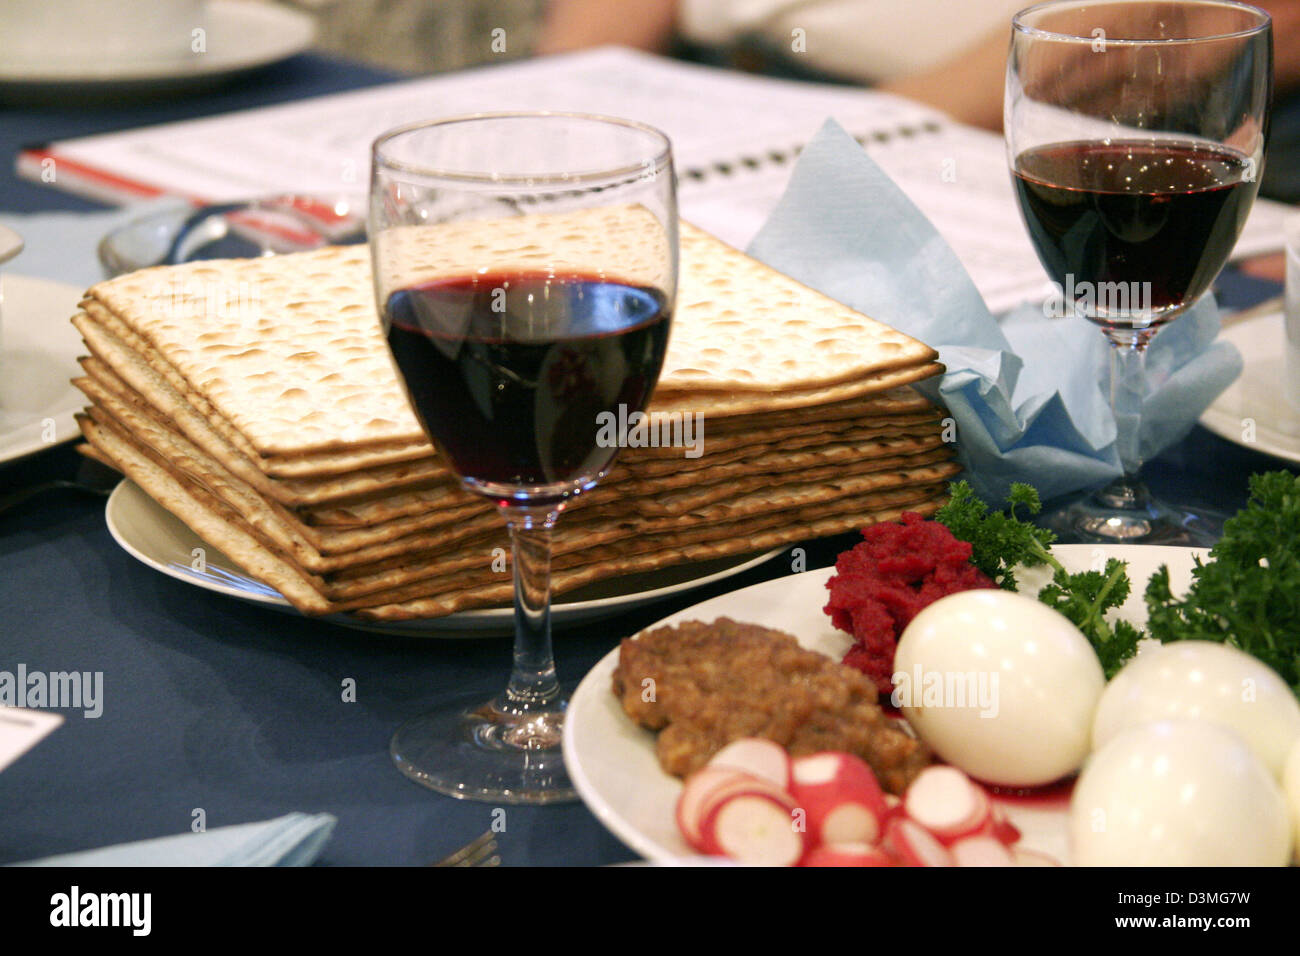 (dpa files) Acidified bread, wine and other traditional symbolic food lie prepared on a table for the Jewish Feast of Passover in the synagogue of the Jewish congregation in Bielefeld, Germany, 23 April 2005. The seven-days lasting celebrations of Passover commemorates the exodus of the Israelite people from Egypt marking one of the most important religious family celebrations in J Stock Photo